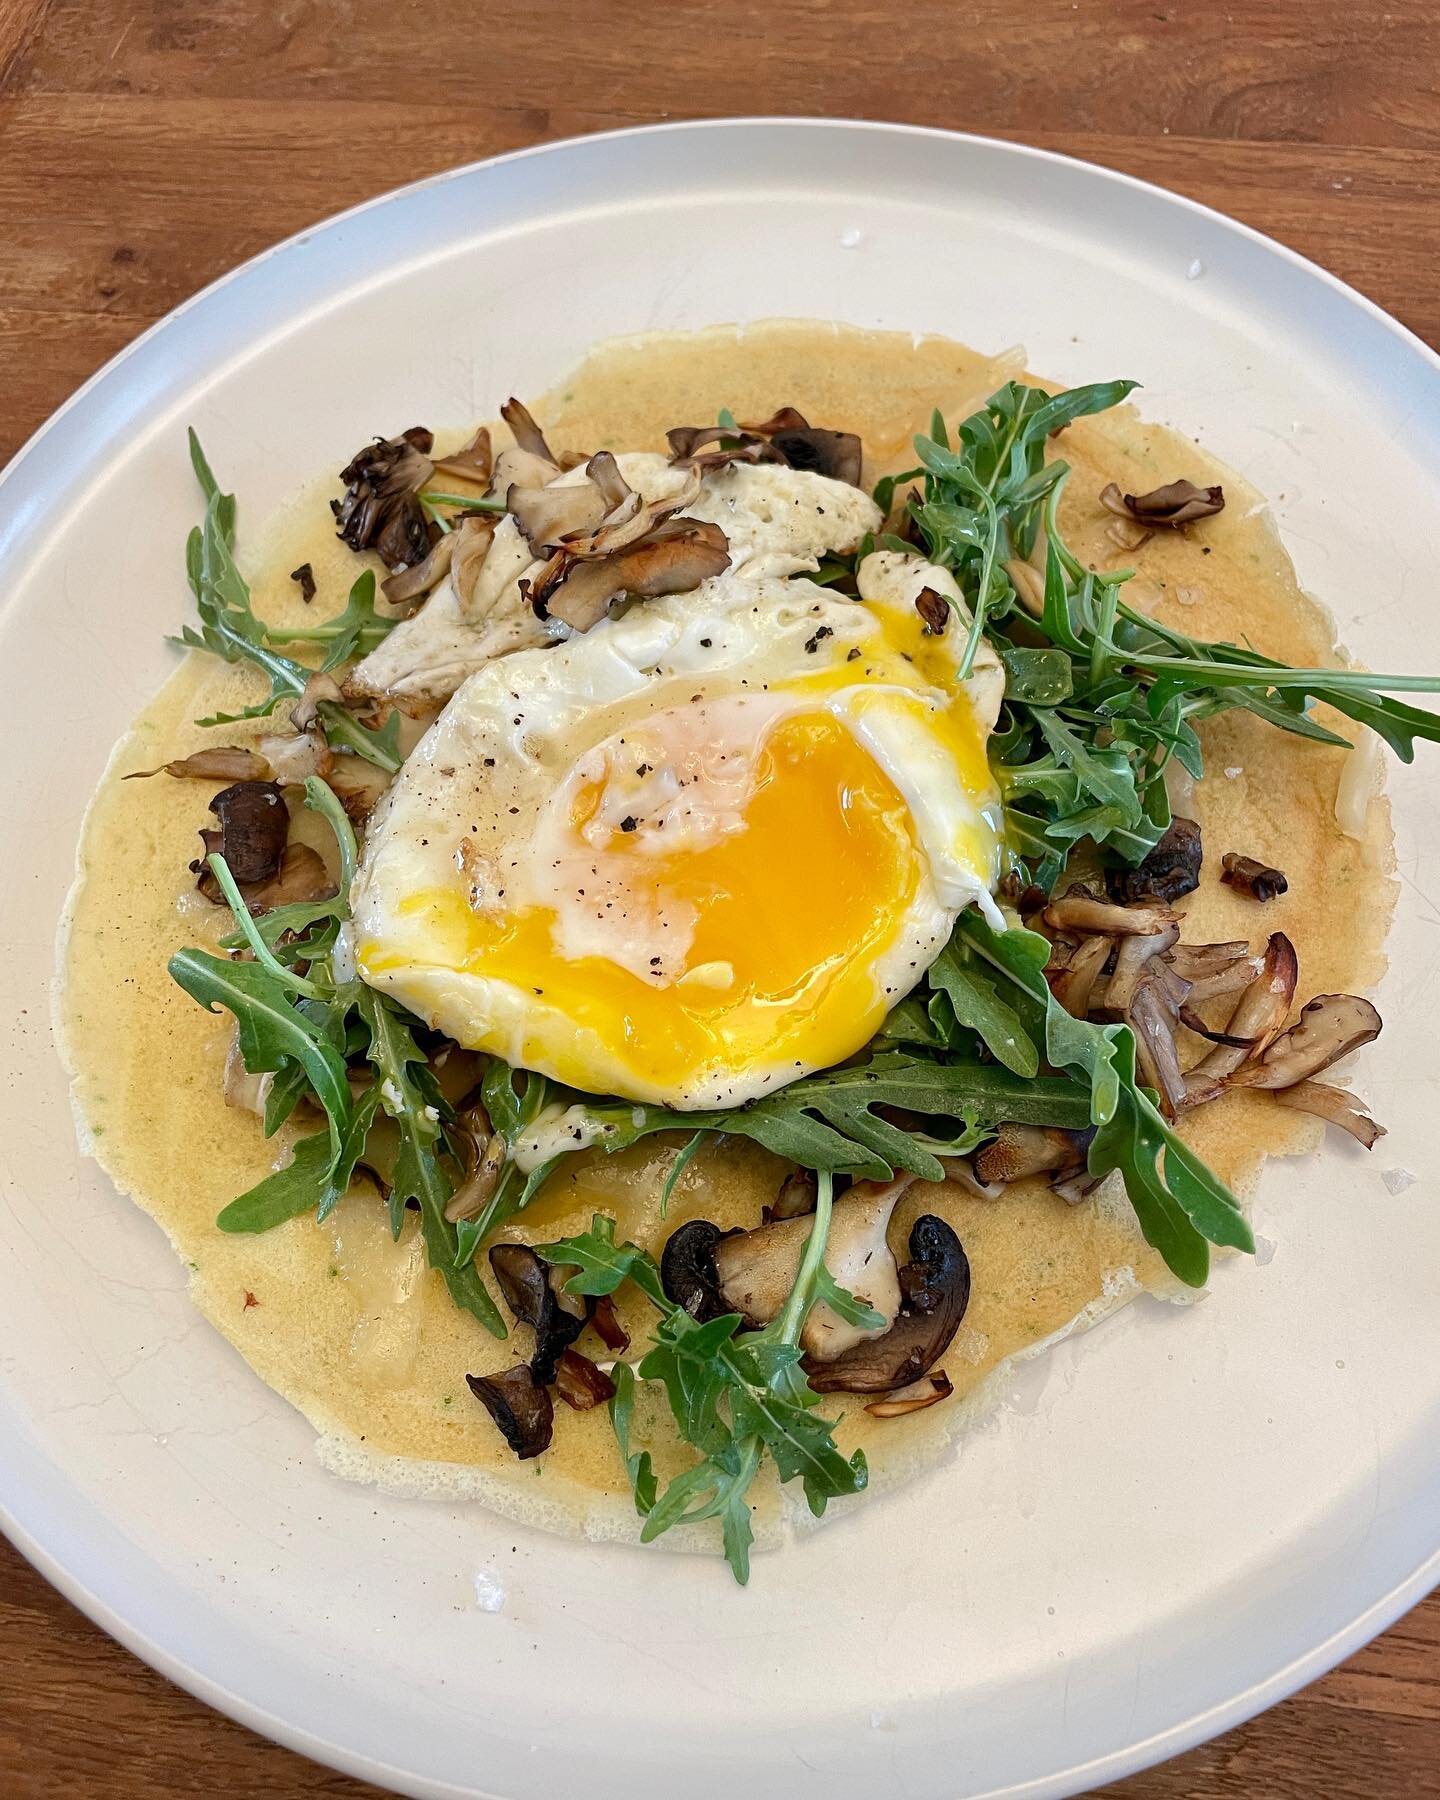 Eggs are my quintessential there&rsquo;s nothing in the fridge food. So versatile, so comforting. This week I made some savory crepes with my discarded sourdough starter then topped them with saut&eacute;ed mushrooms arugula and it seems almost every